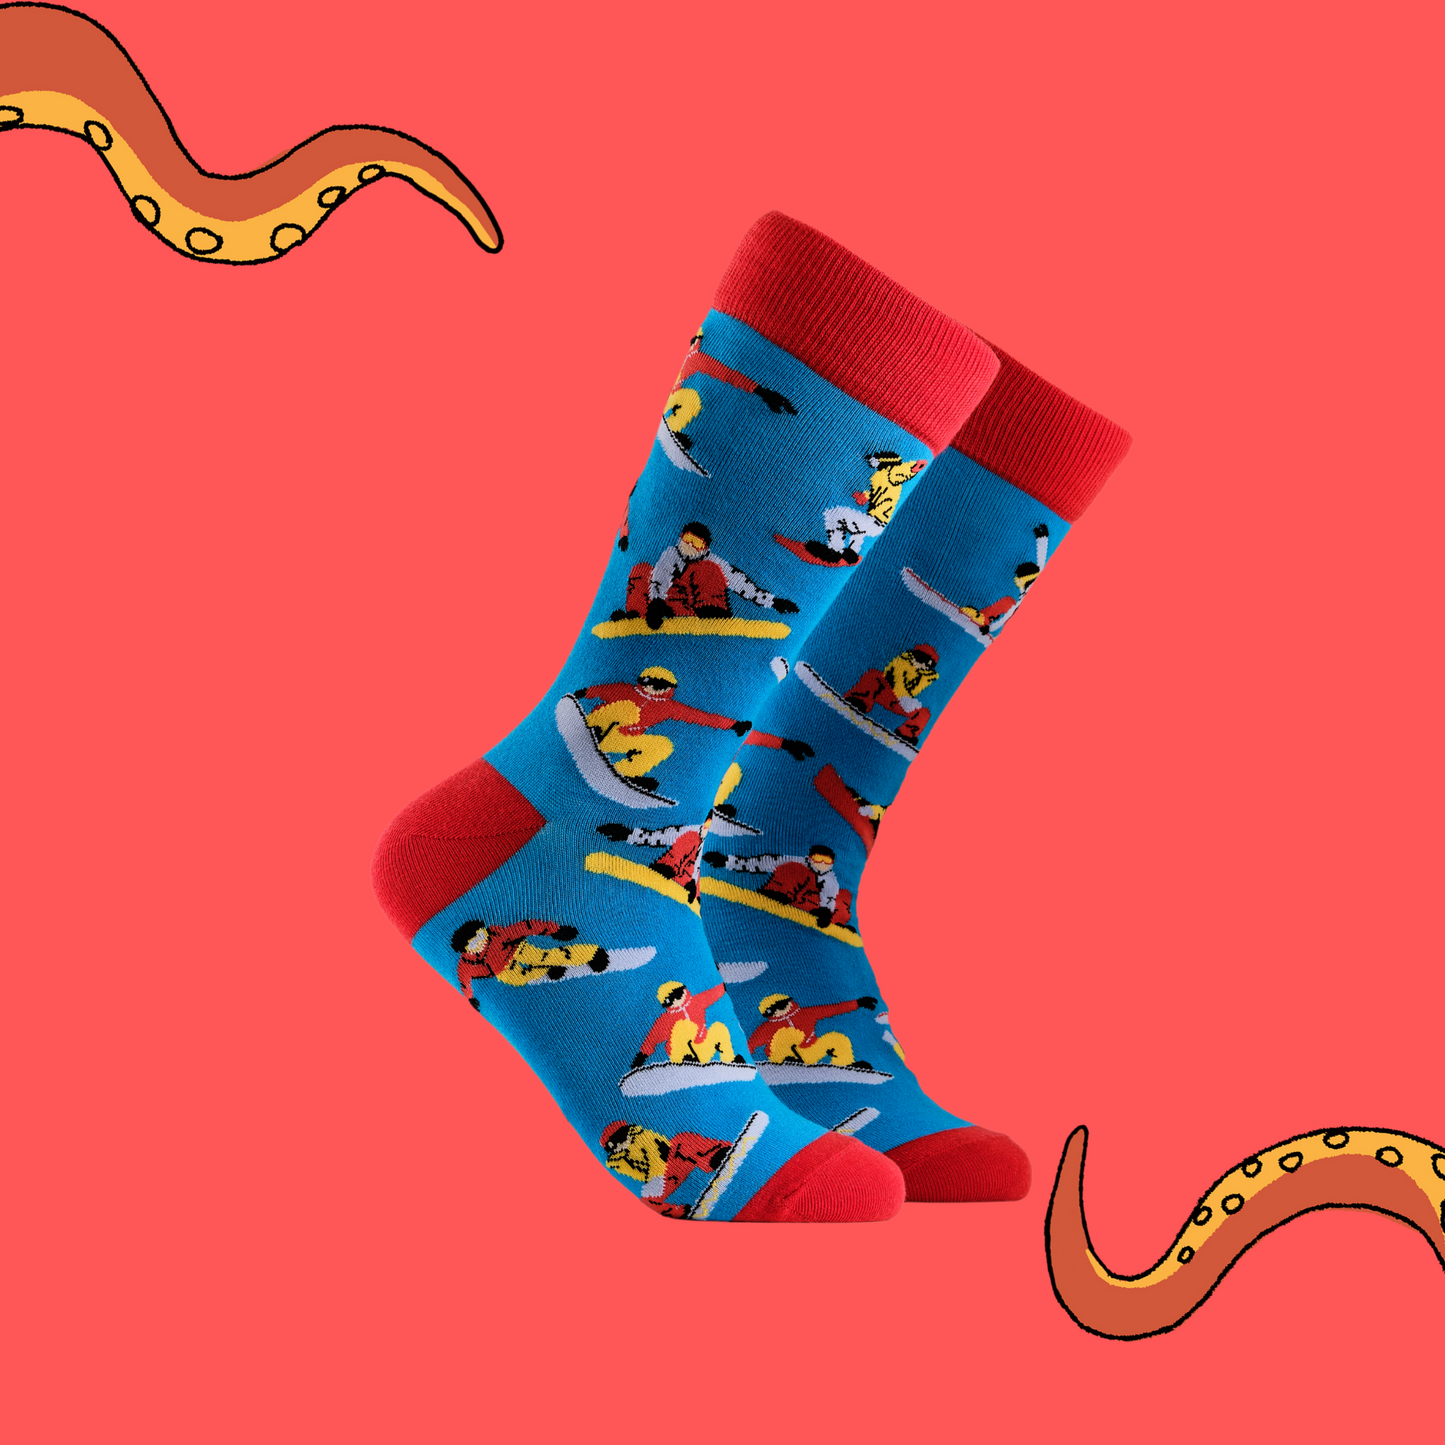 A pair of socks depicting snowboarders. Blue legs, red cuff, heel and toe.